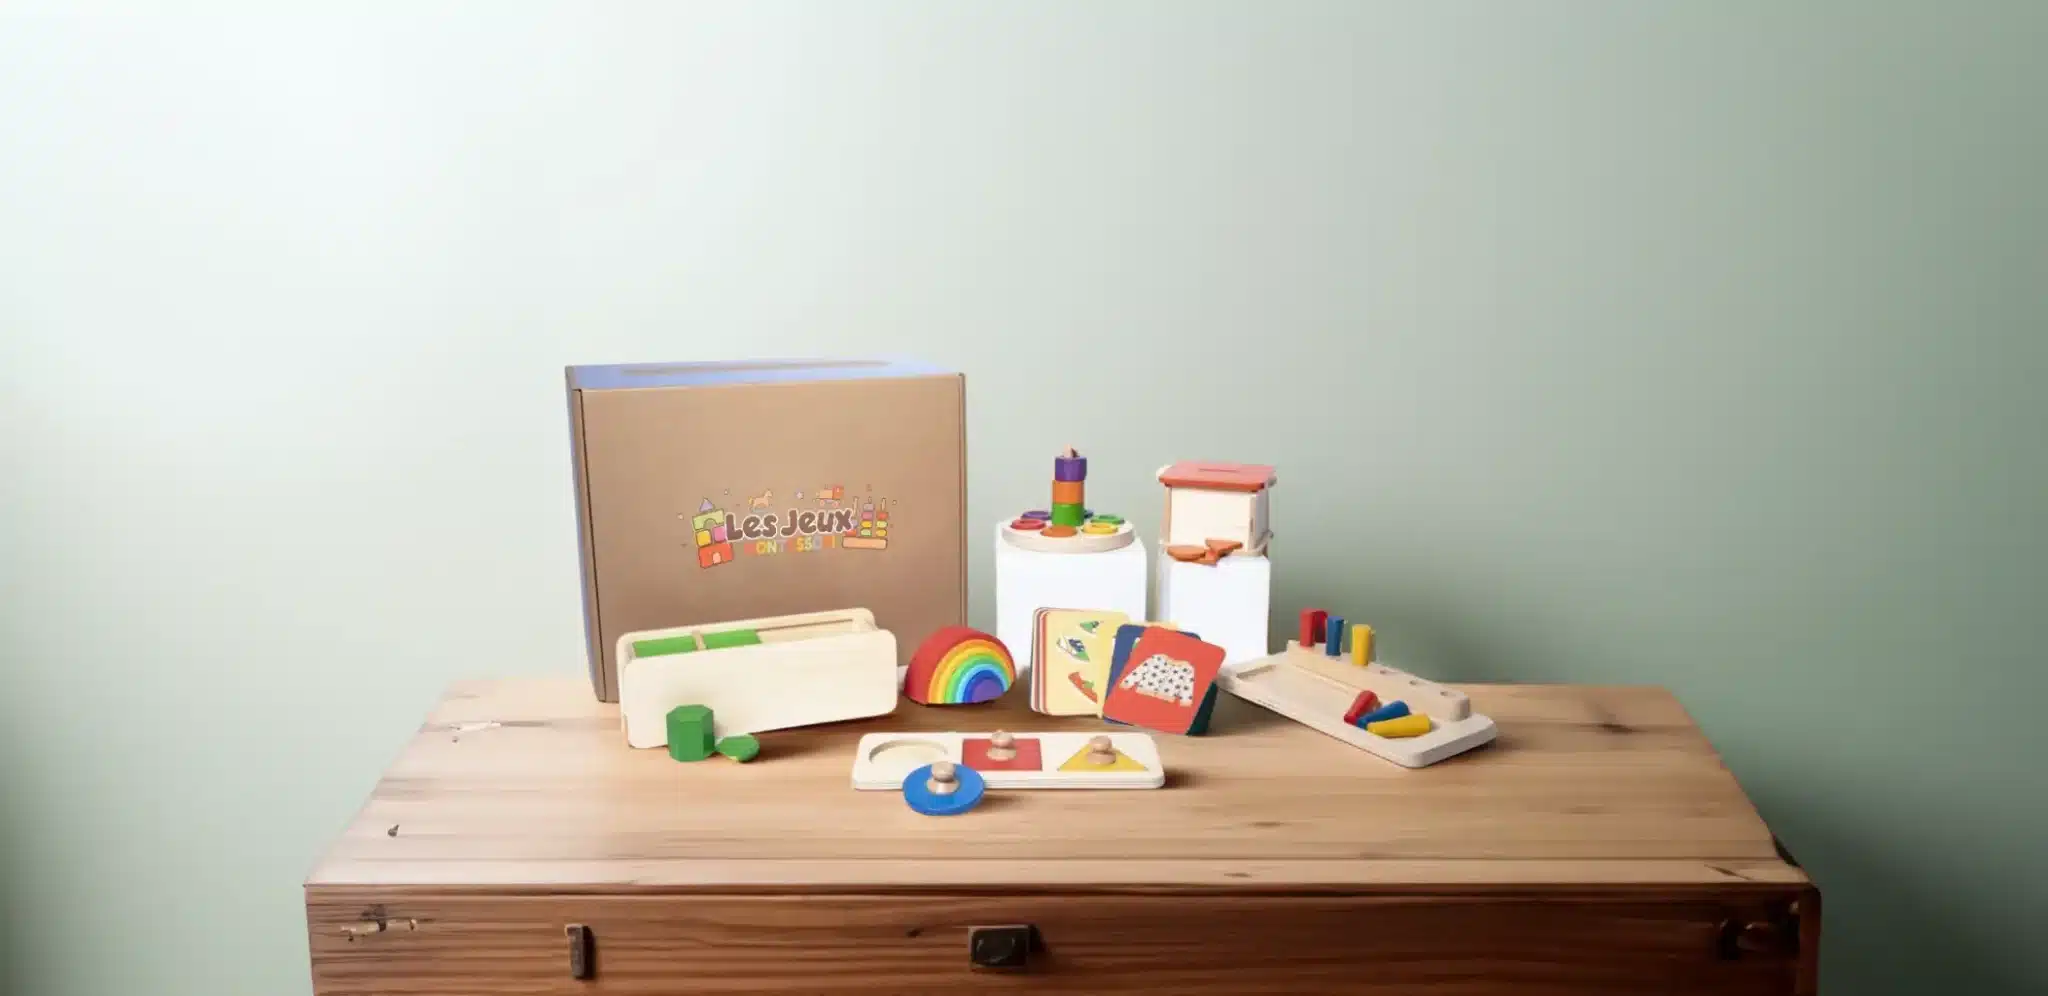 A Montessori table features a wooden box filled with toys.